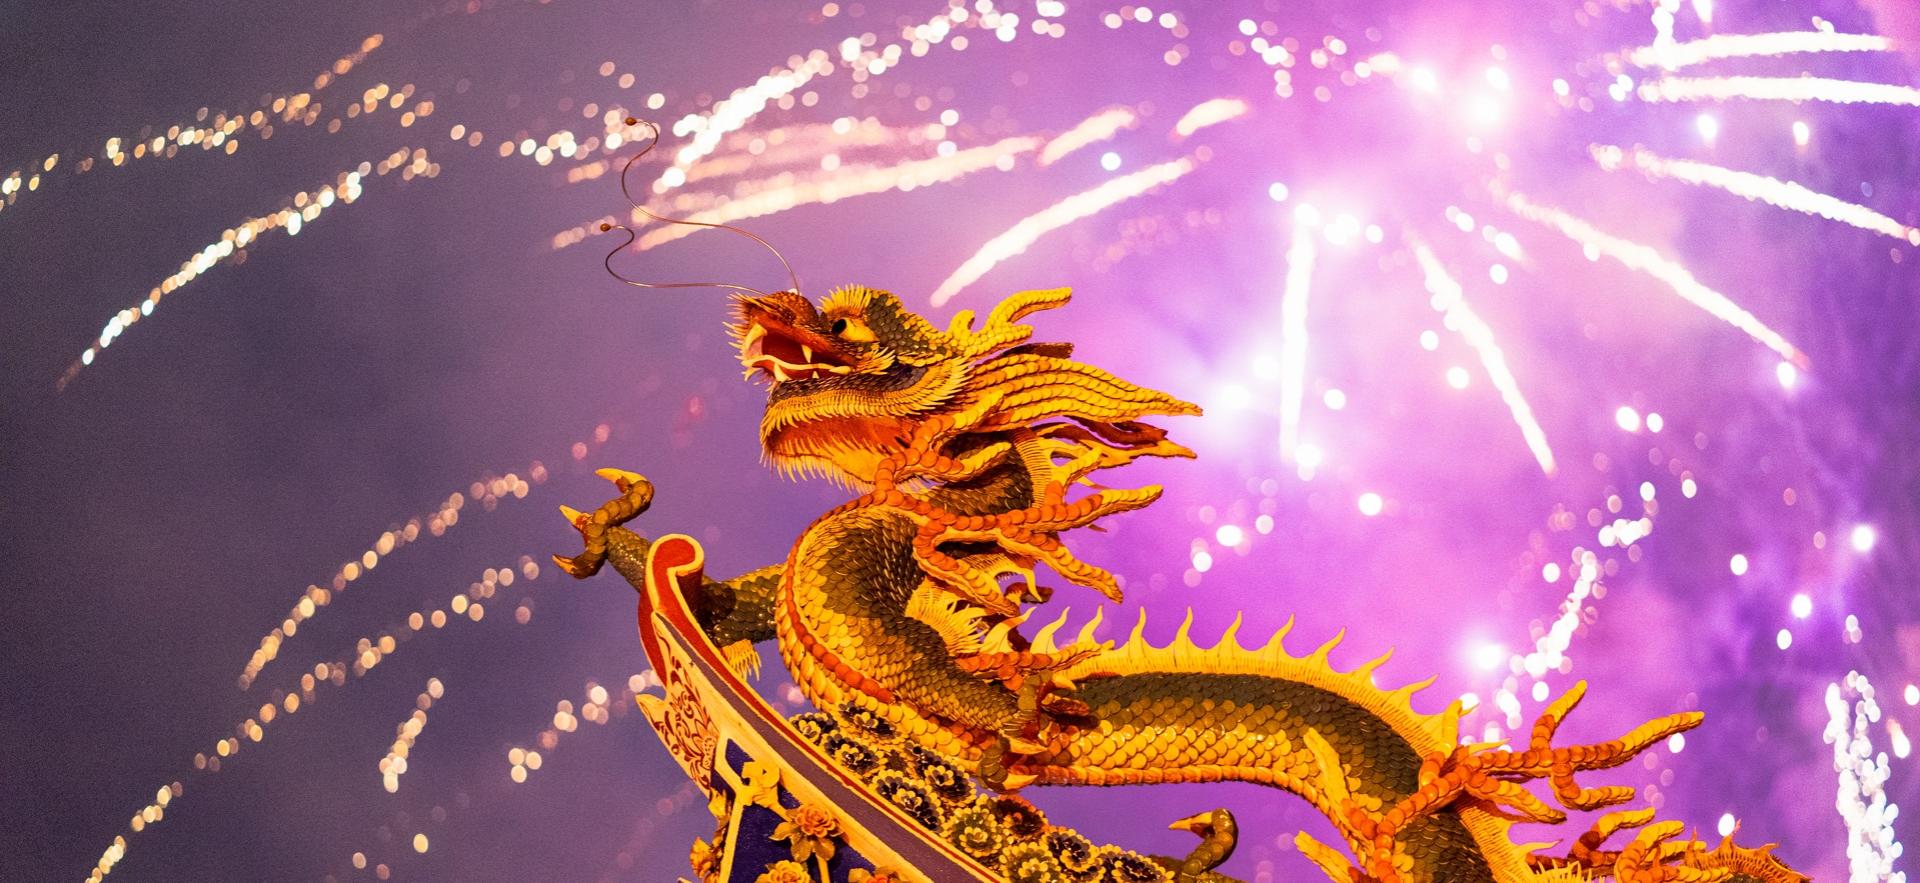 Jess' photo of dragon with fireworks in background from Malaysia